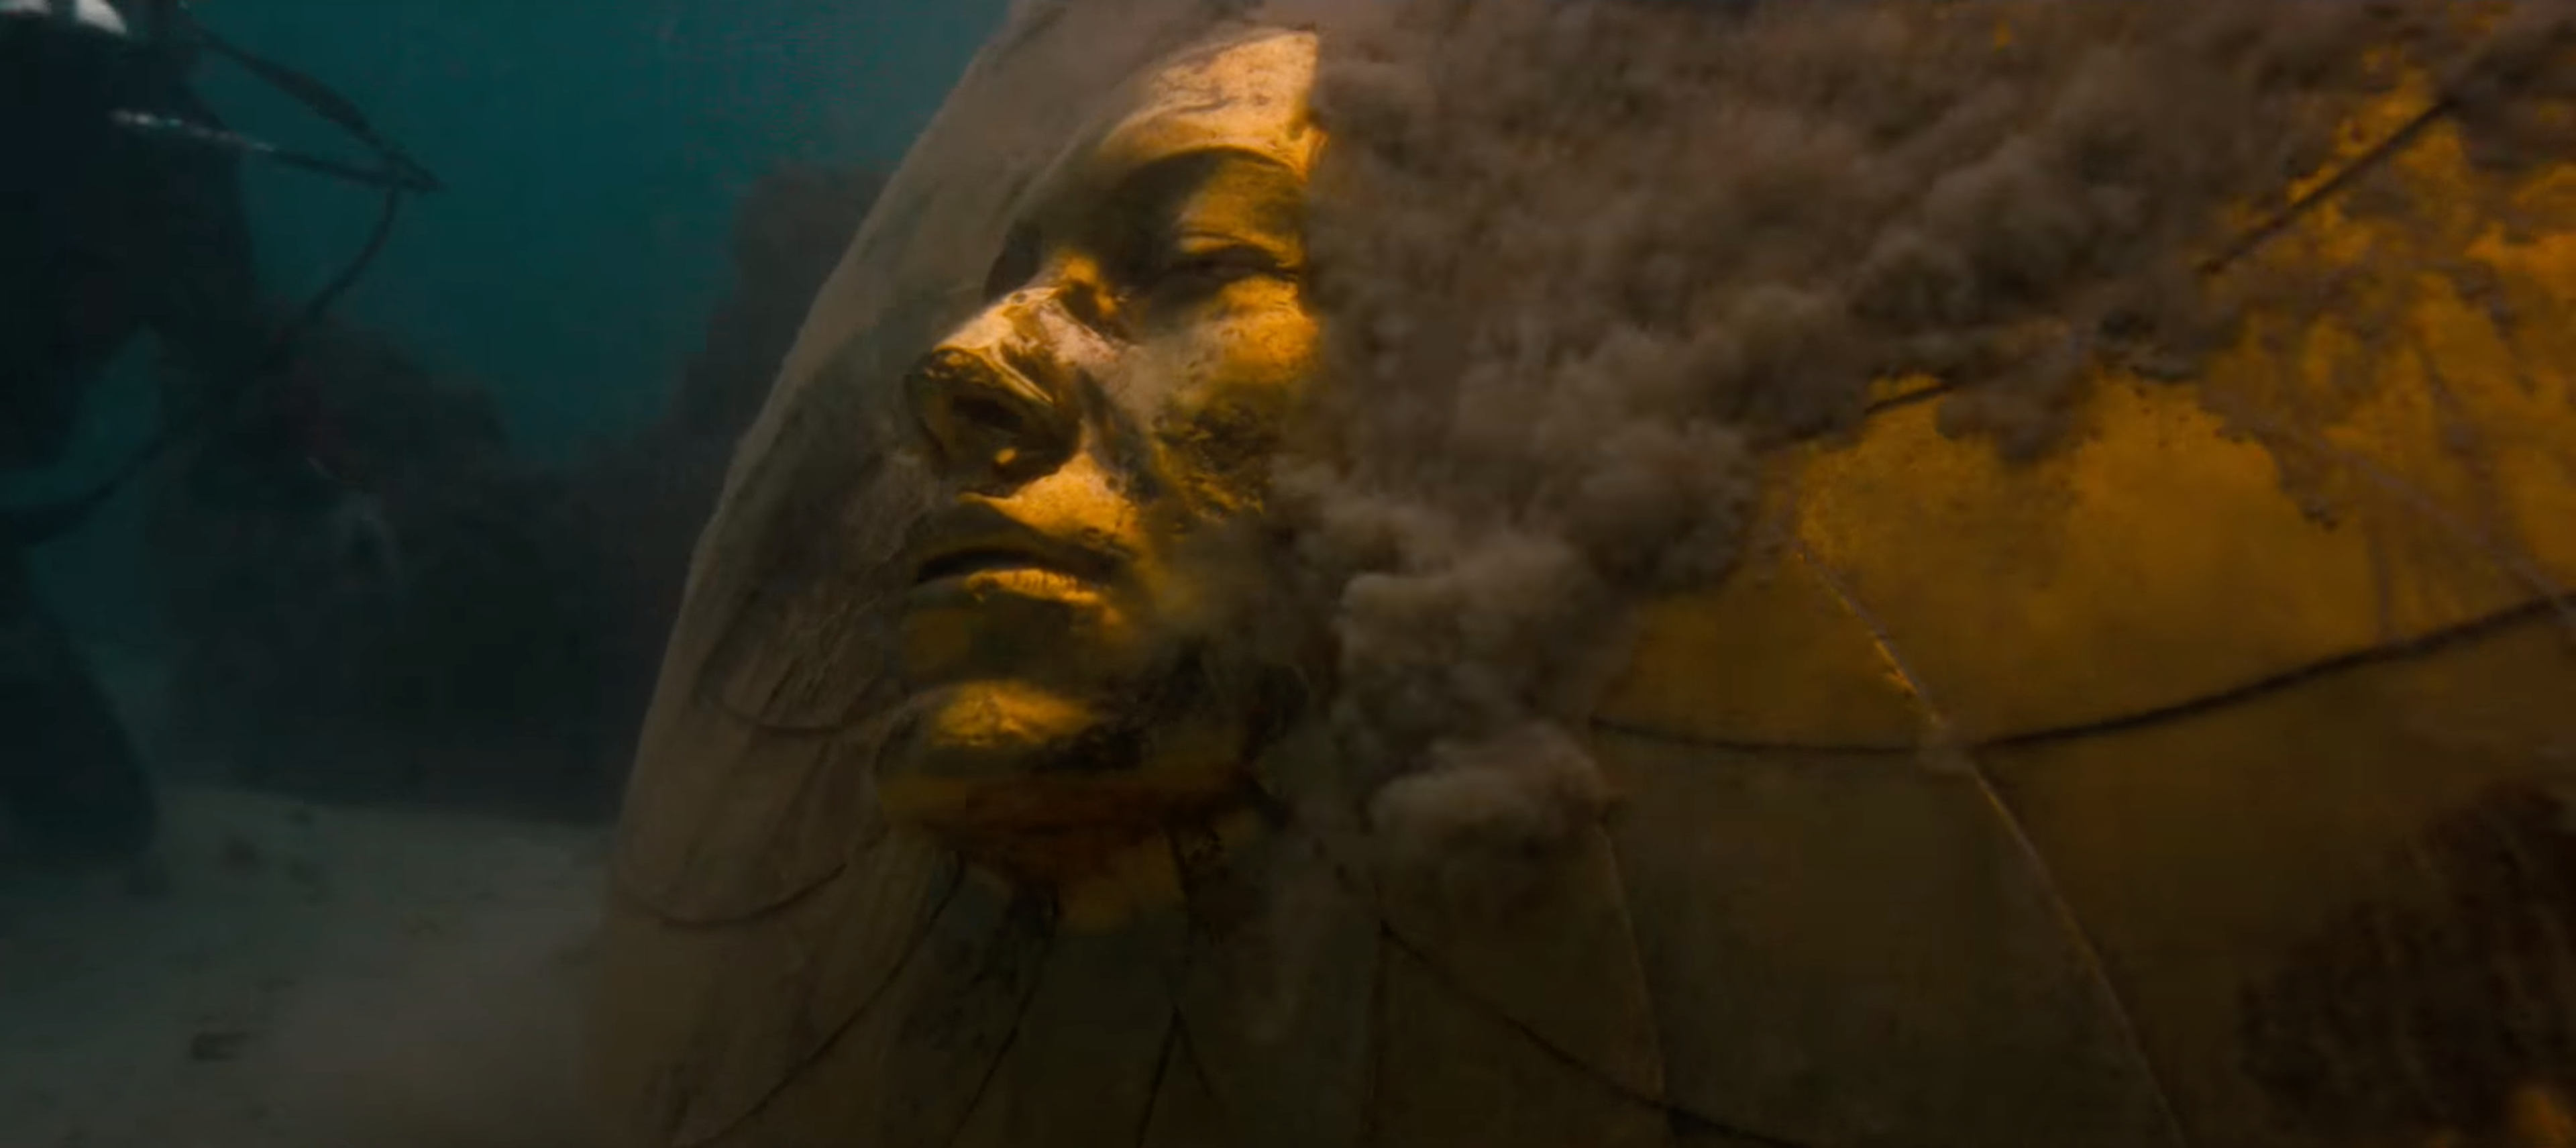 A large-scale golden sculpture depicting a face is seen underwater, surrounded by sand.